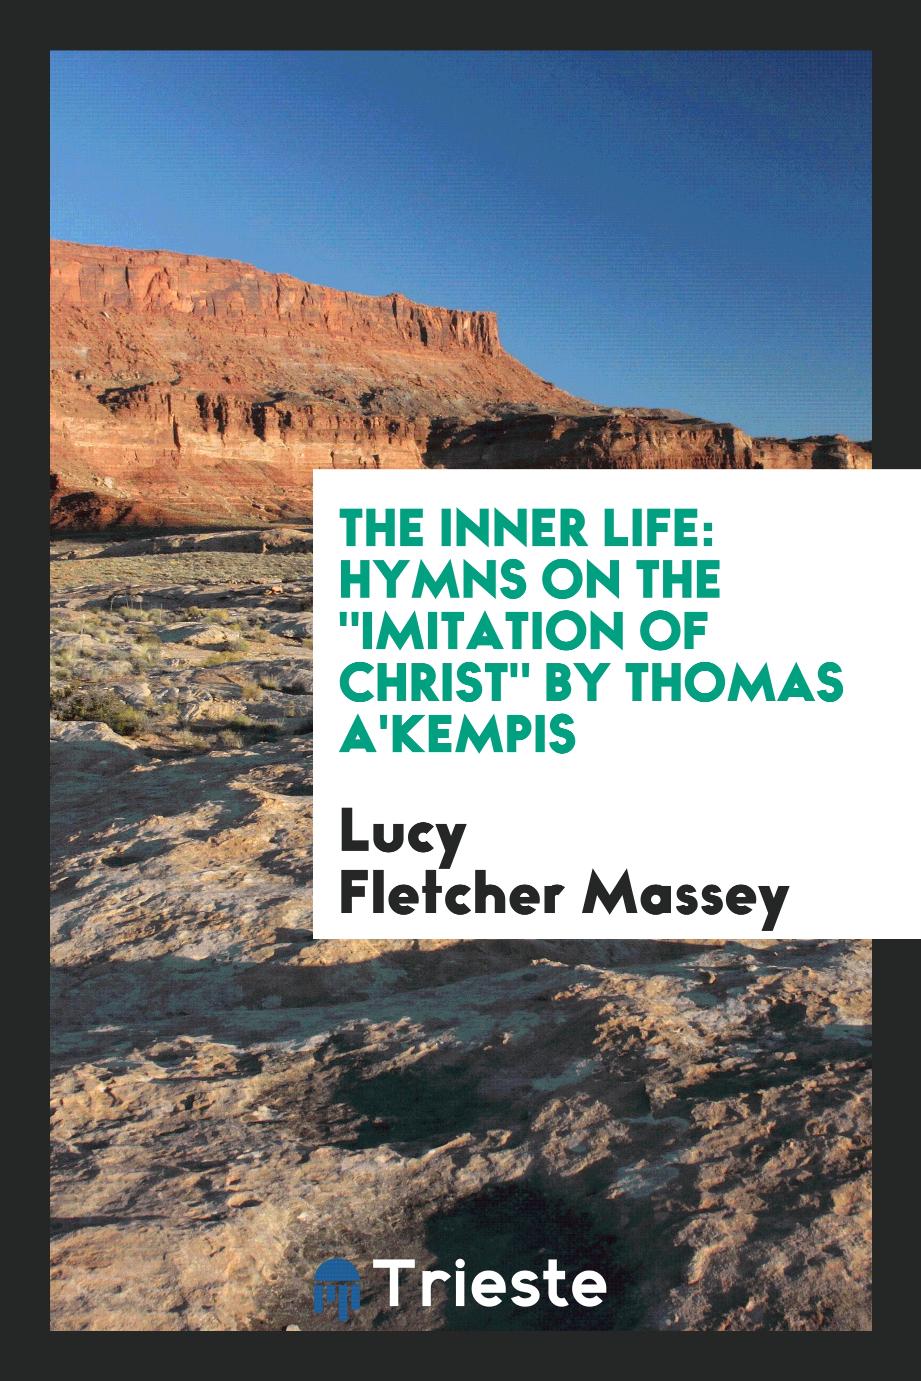 The Inner Life: Hymns on the "Imitation of Christ" by Thomas A'Kempis